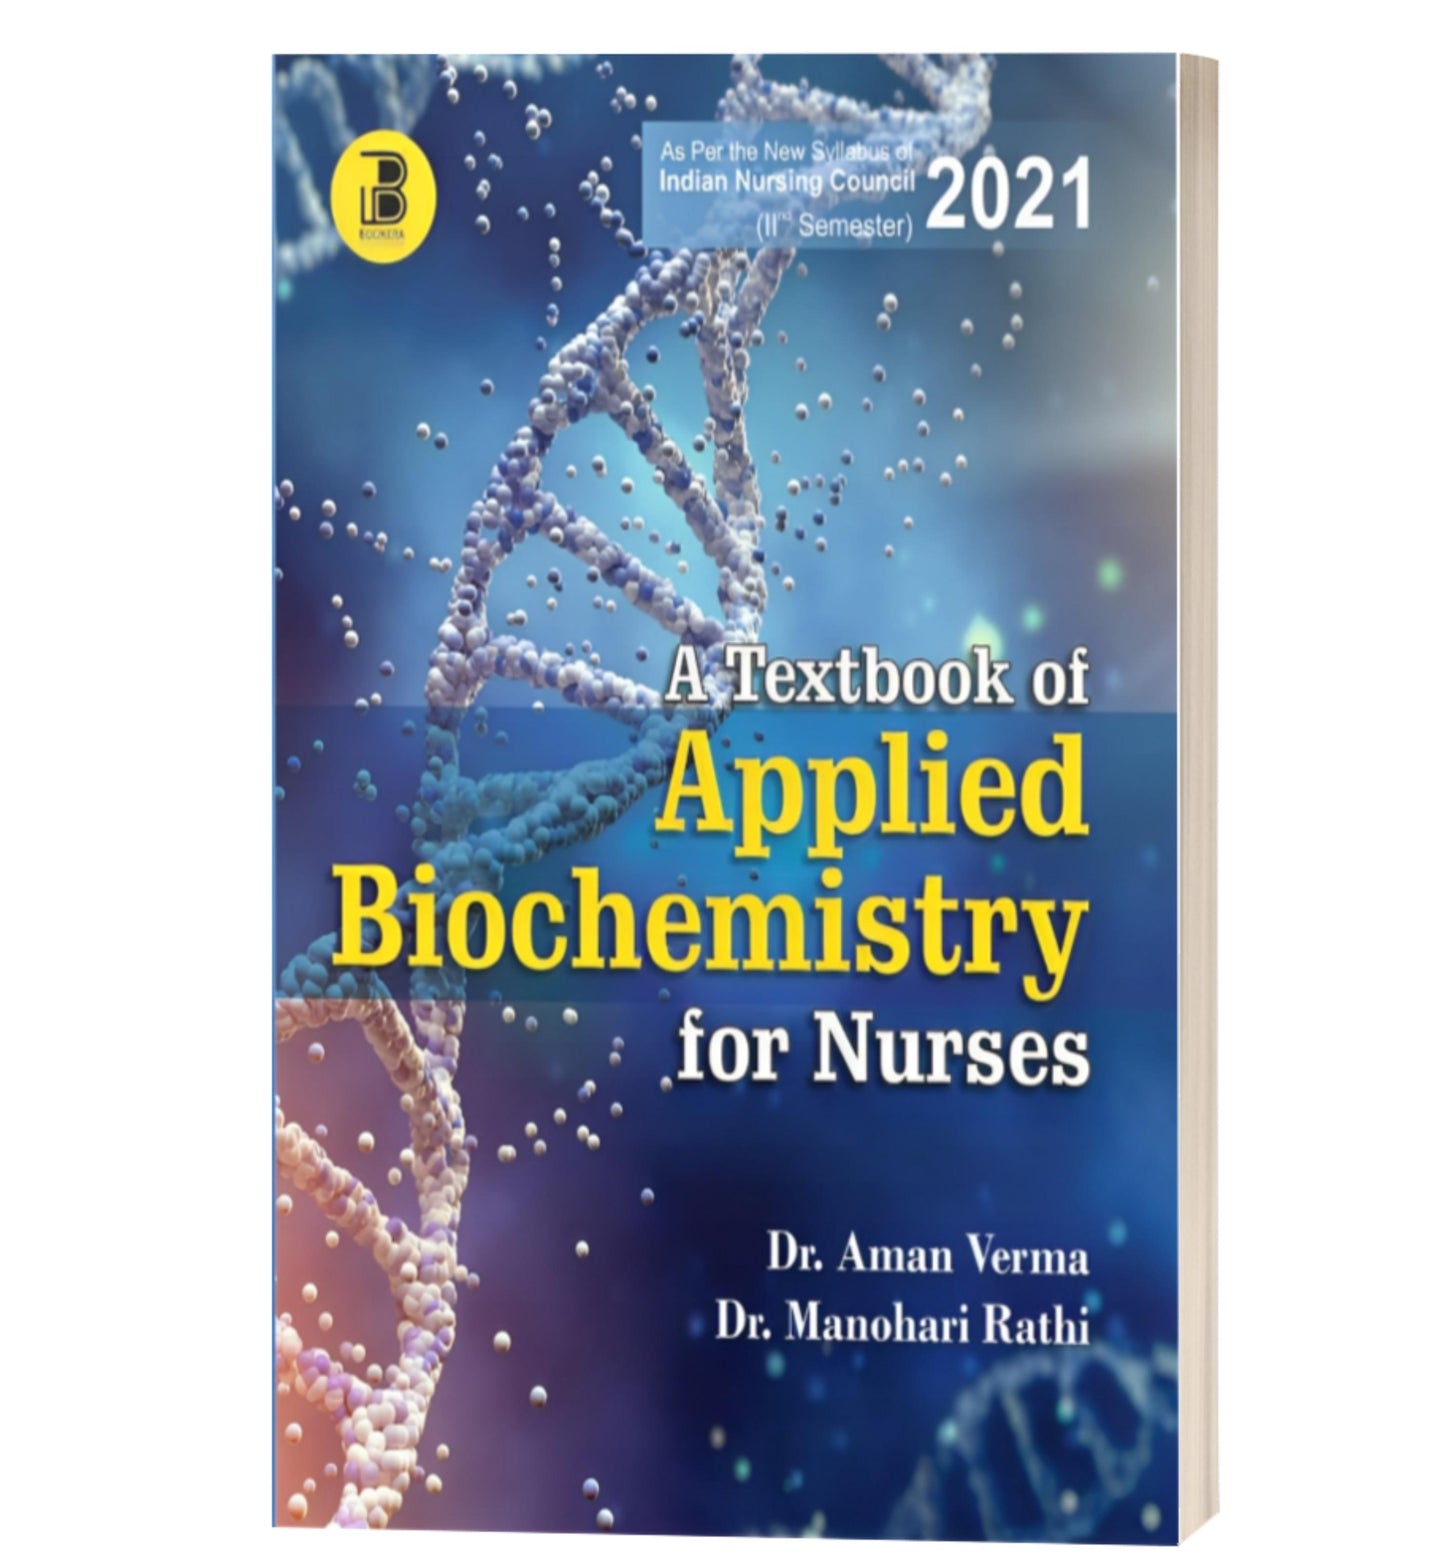 A Textbook of Applied Biochemistry for Nurses